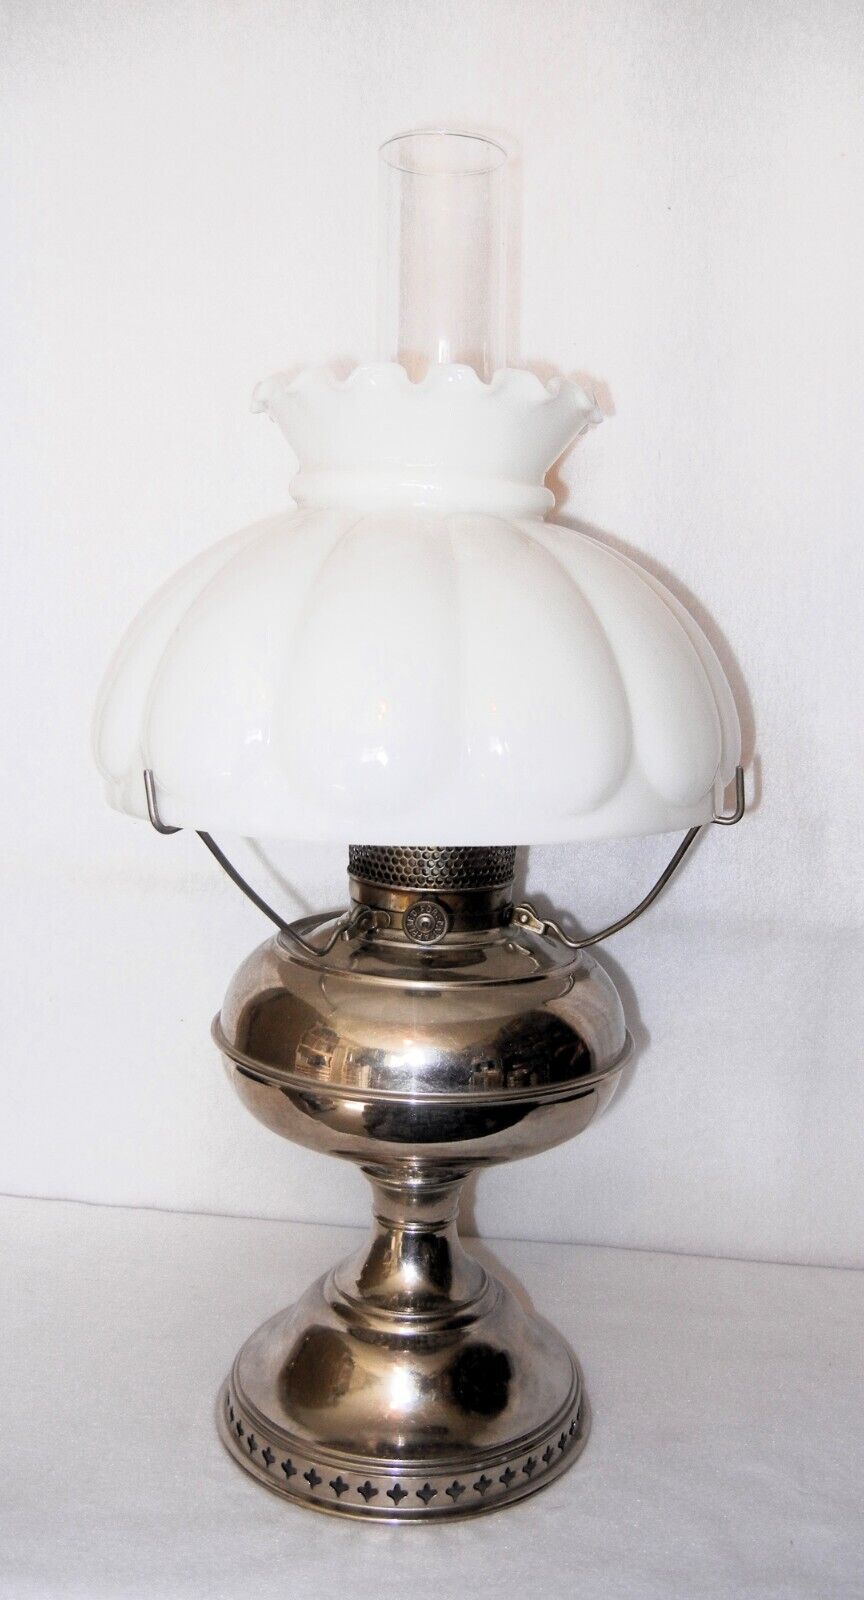 Antique B & H Bradley Hubbard Nickle Plated Oil Lamp with Melon Shade, 1890's